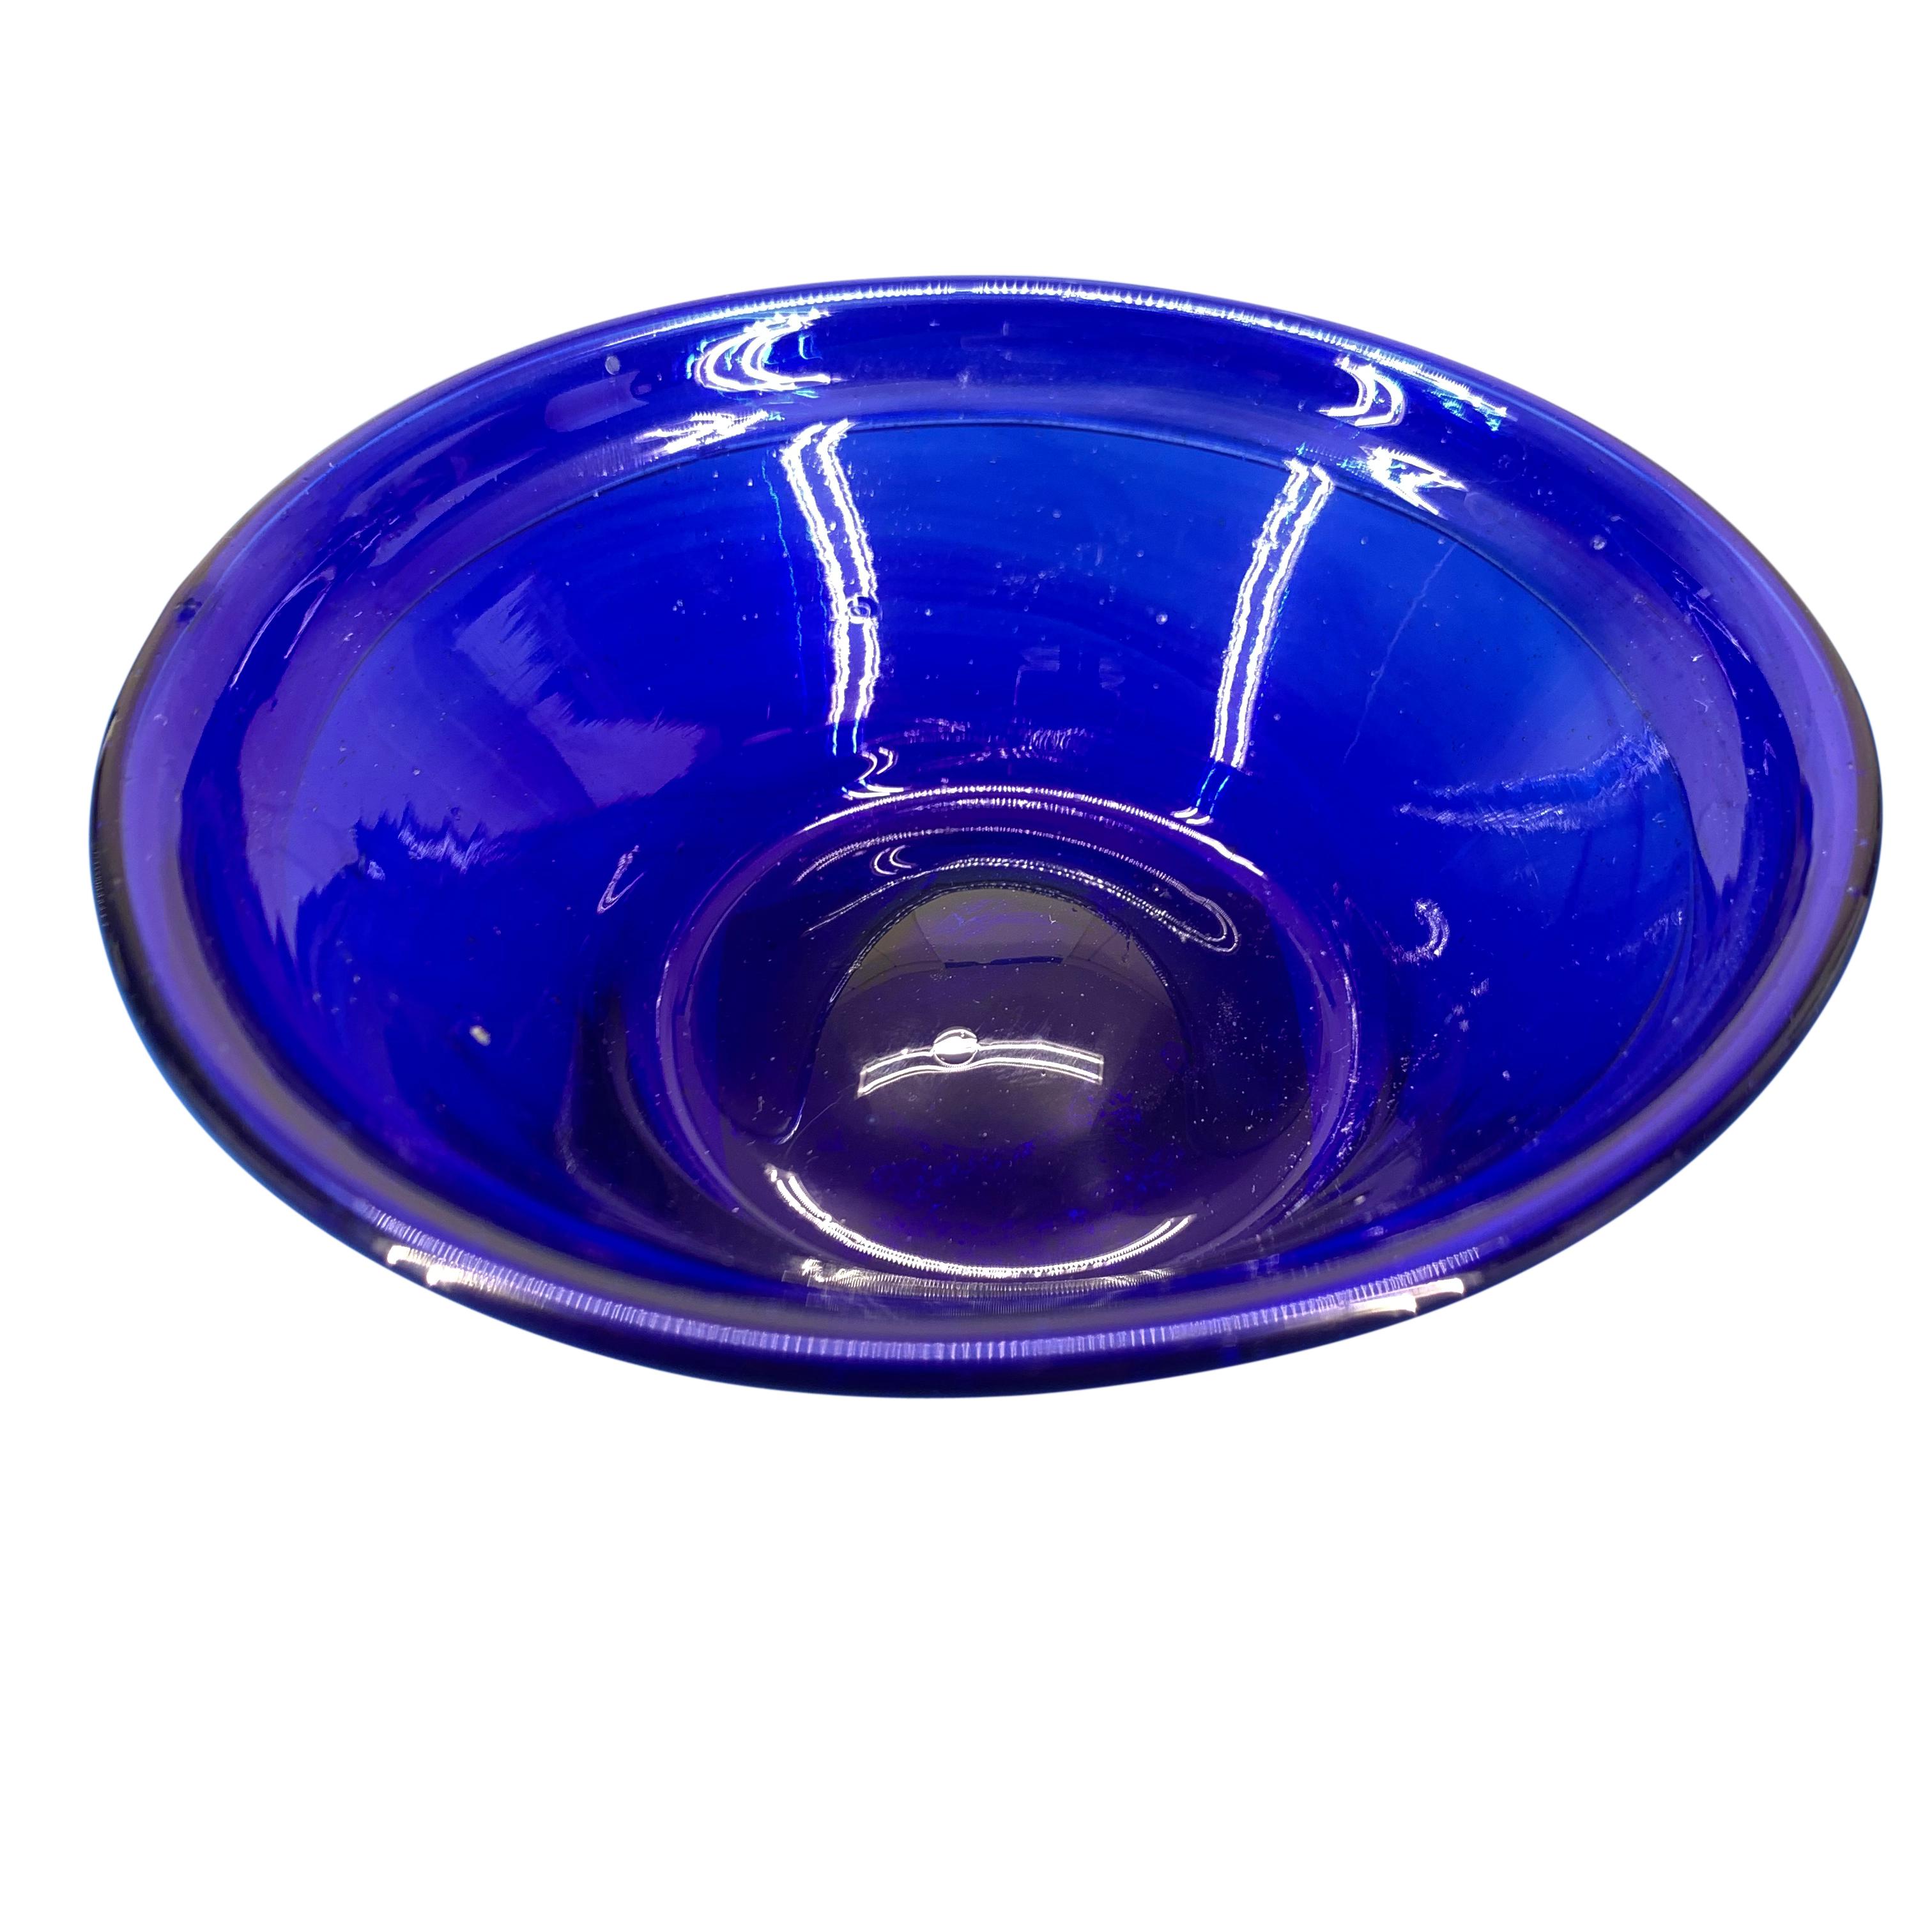 Early Swedish 19th Century blue glass candy bowl or dish.
This type of glass bowl was typically used for yoghurt and other dairy products.